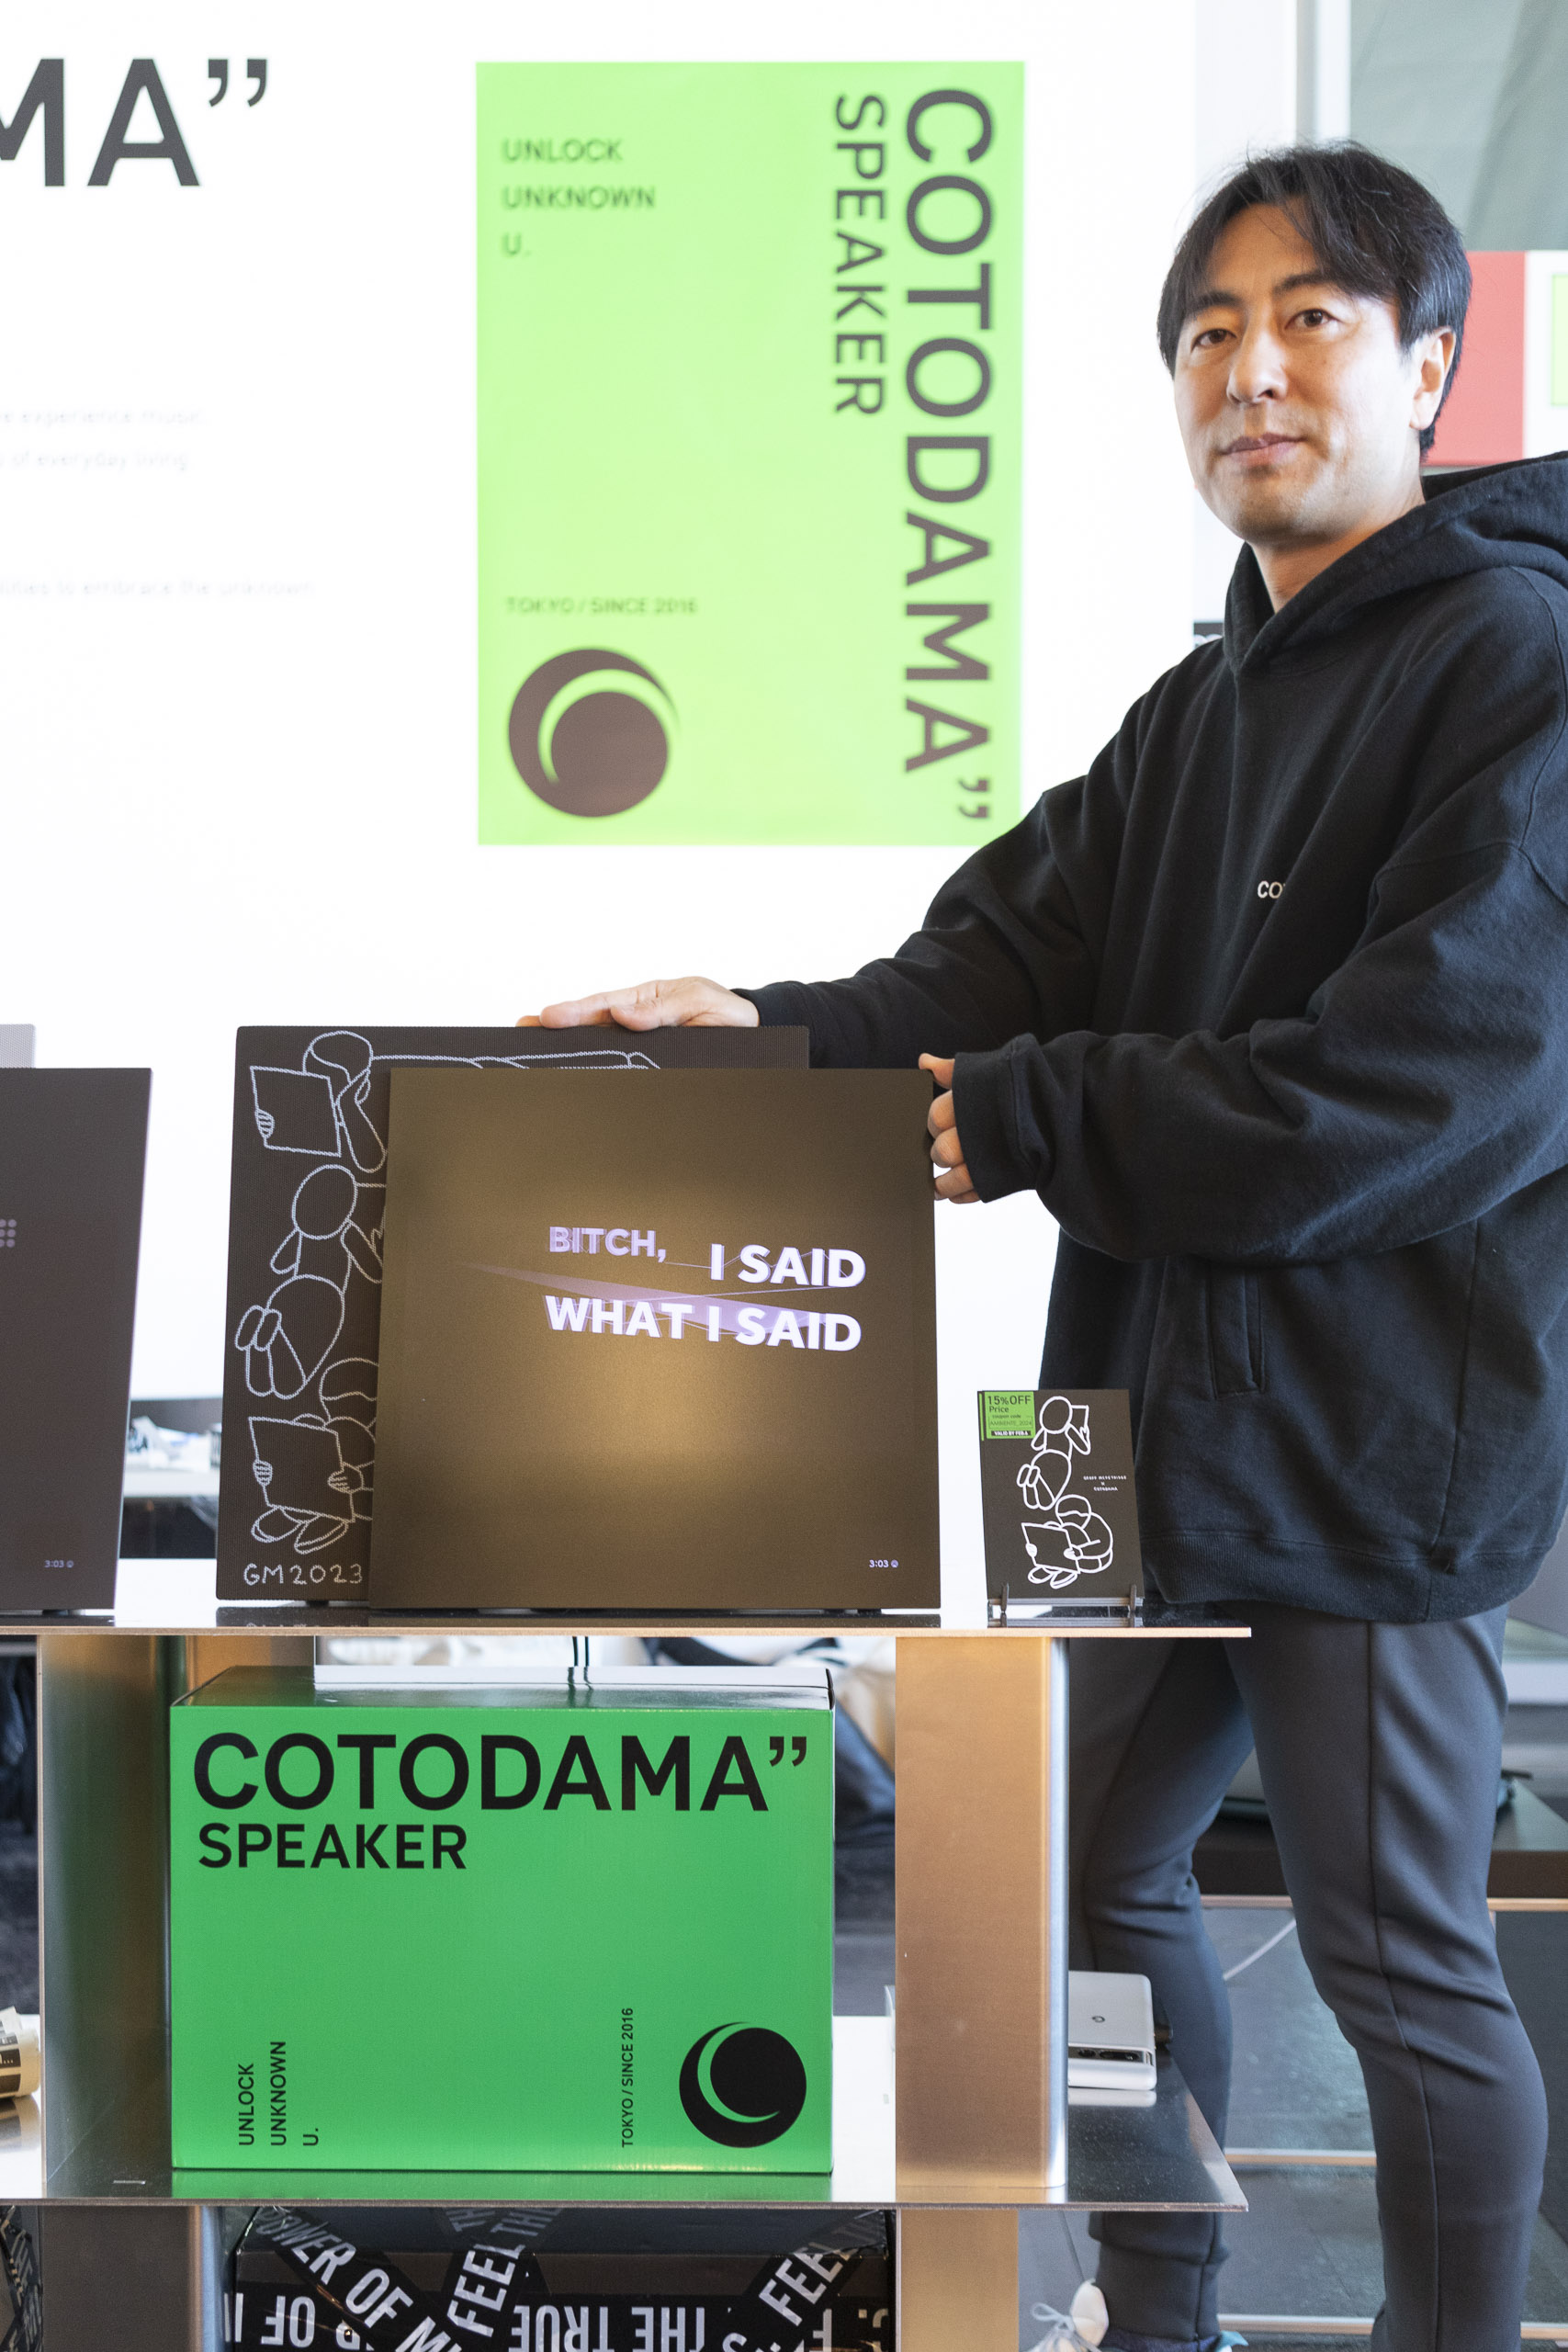 Cotodama from Japan converts song lyrics into text or graphics and displays them on the screen in real time.